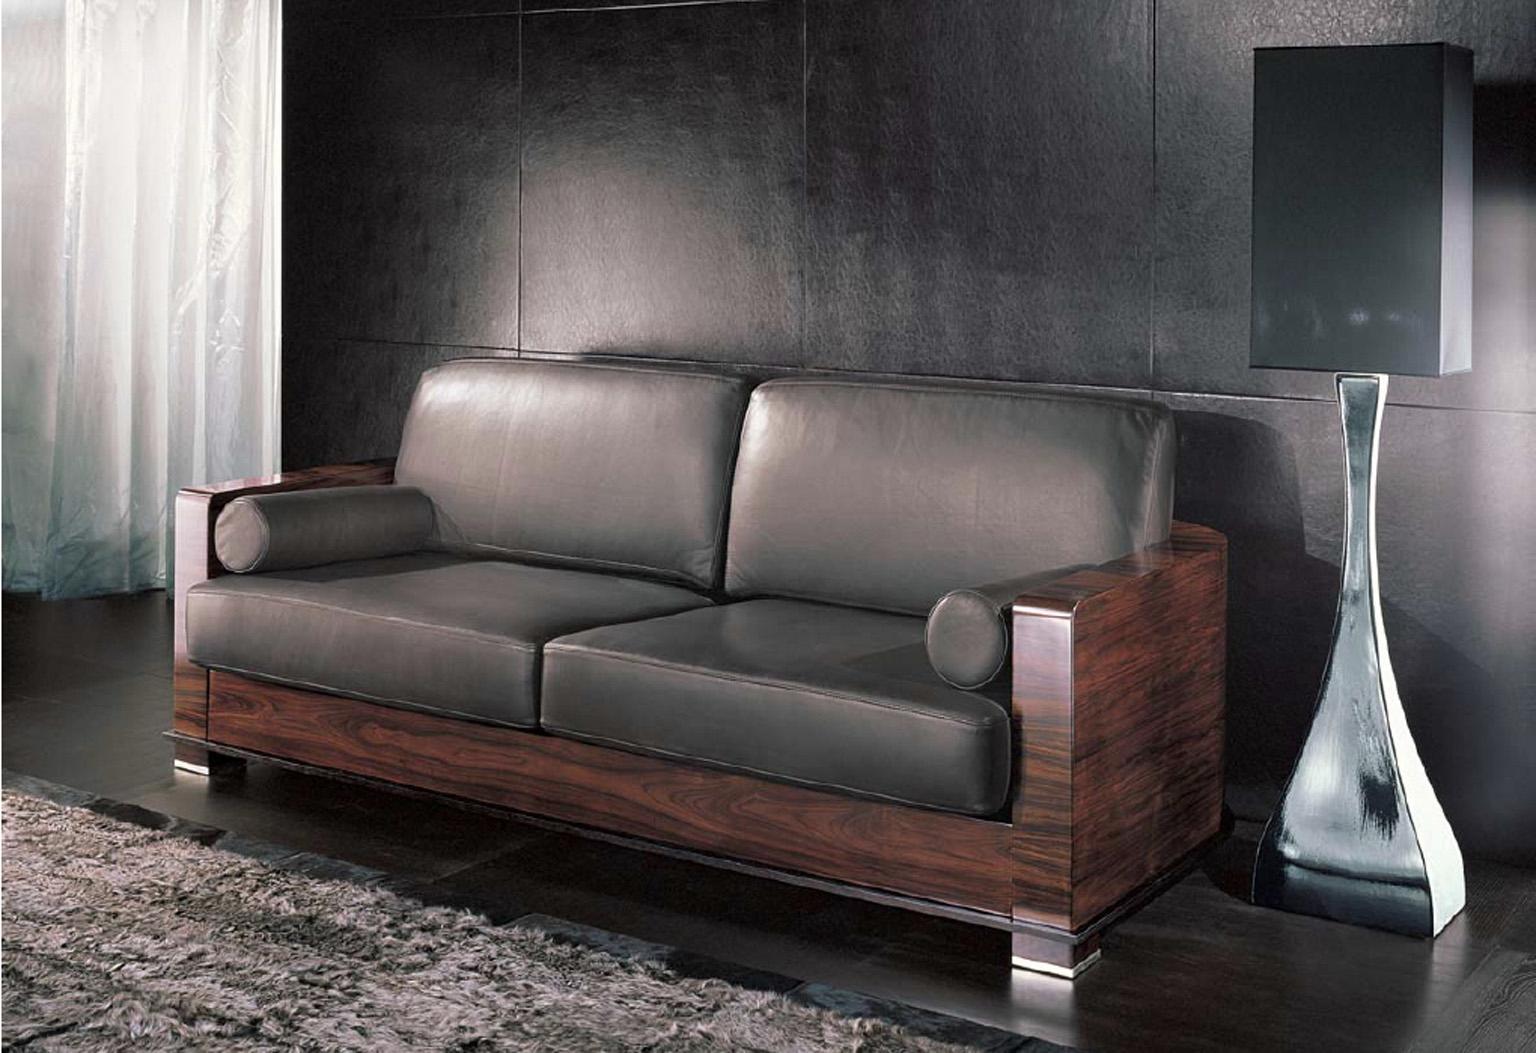 Giorgio Collection Paradiso Sofa 3 seaters Brazilian rosewood in Beige suede and satin finish.
Sofa 3 seats in Brazilian rosewood satin finish with seats and backs.
Covered in first grade brown leather.
Brushed steel accents on the base.
Size: